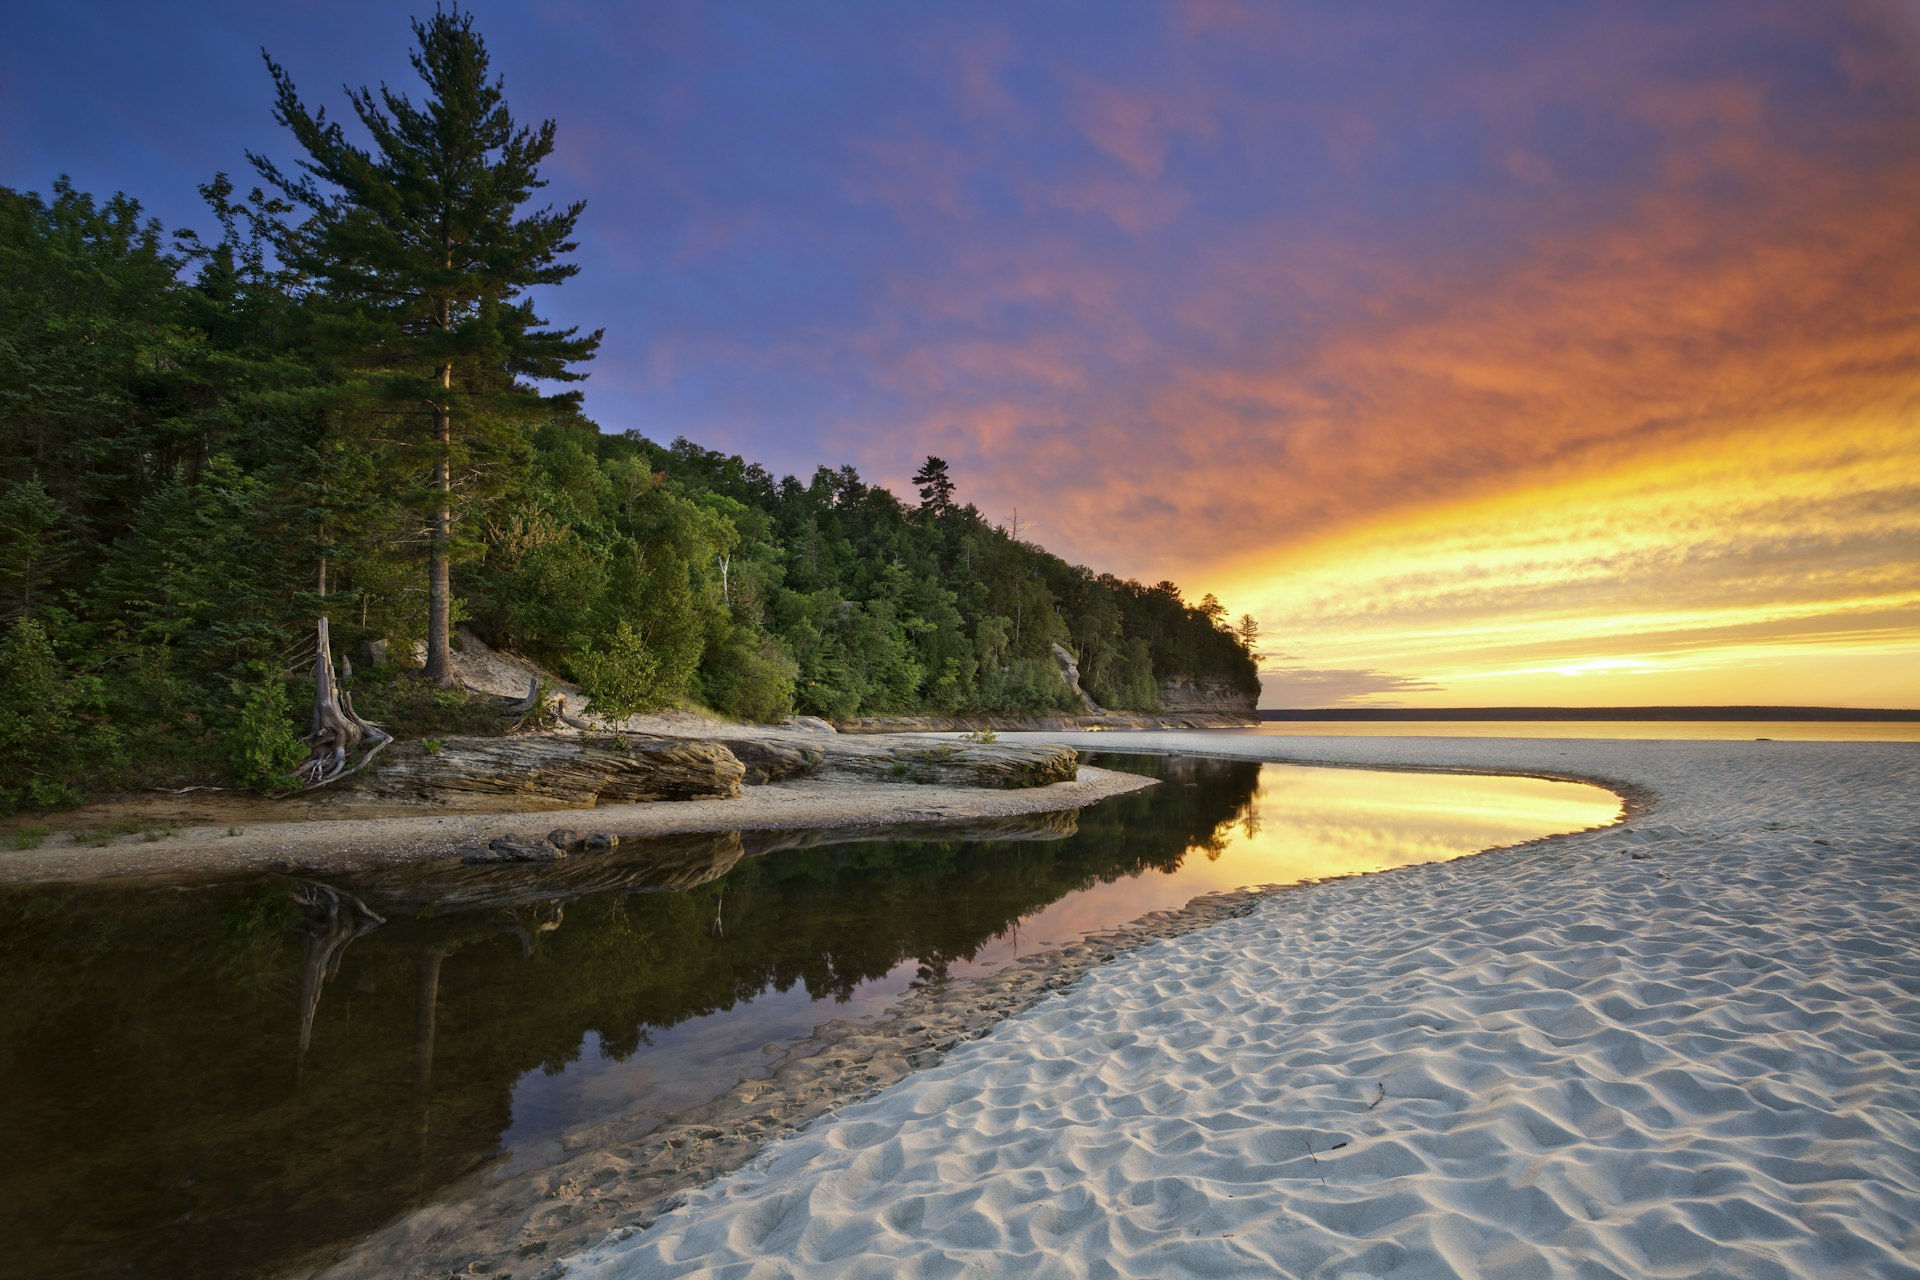 Forest meets beach as the sun sets at Miners Beach at Pictured Rocks National Lakeshore, Michigan